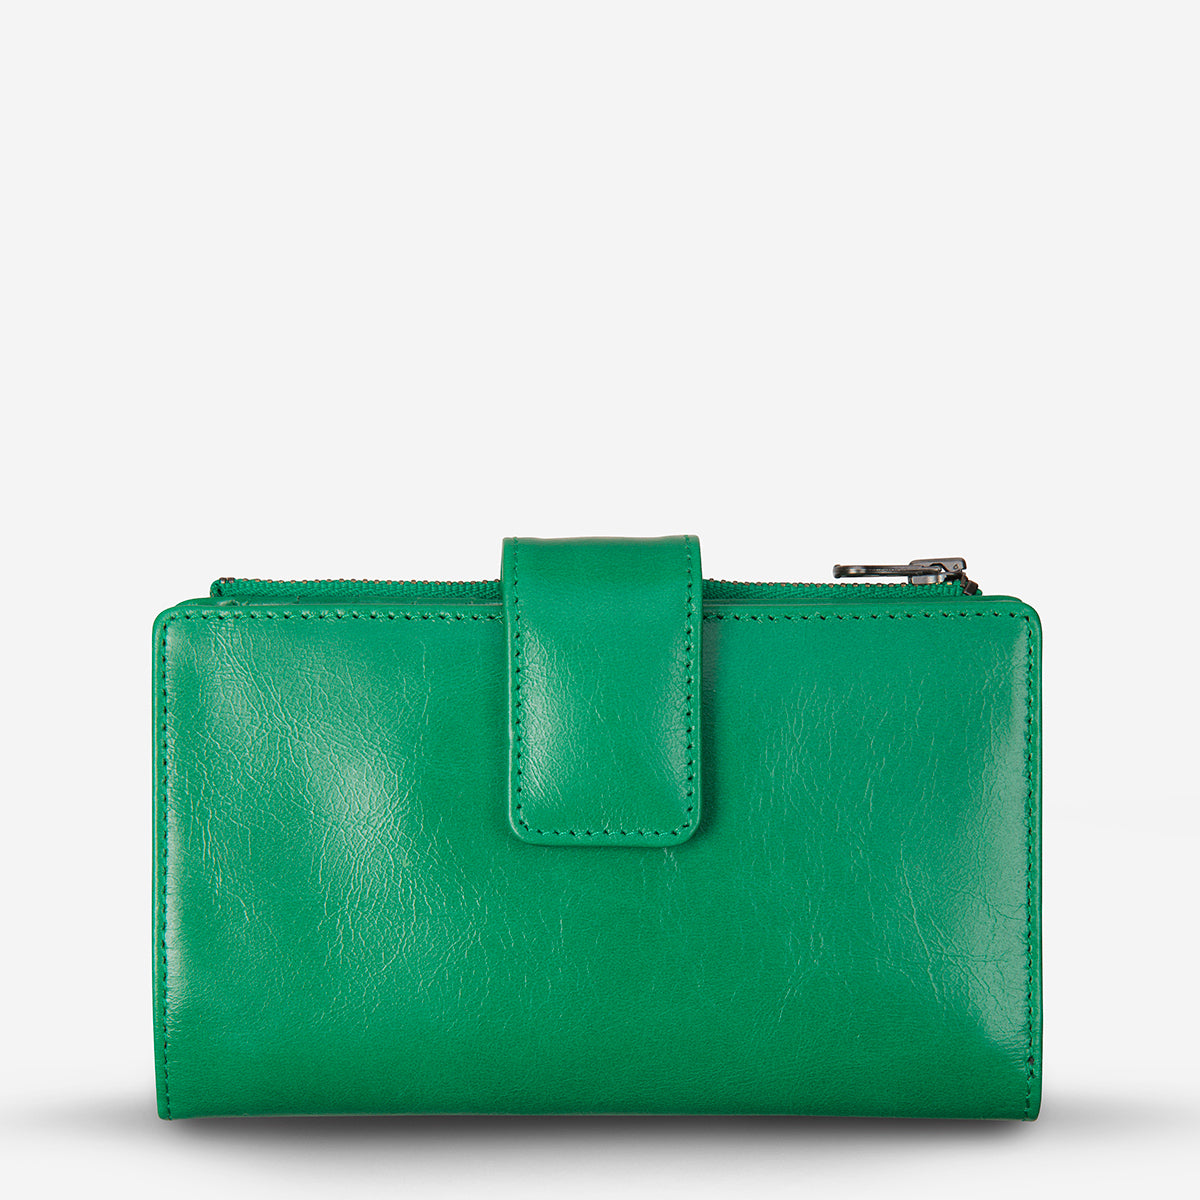 Outsider Women s Emerald Leather Wallet  Status  Anxiety 